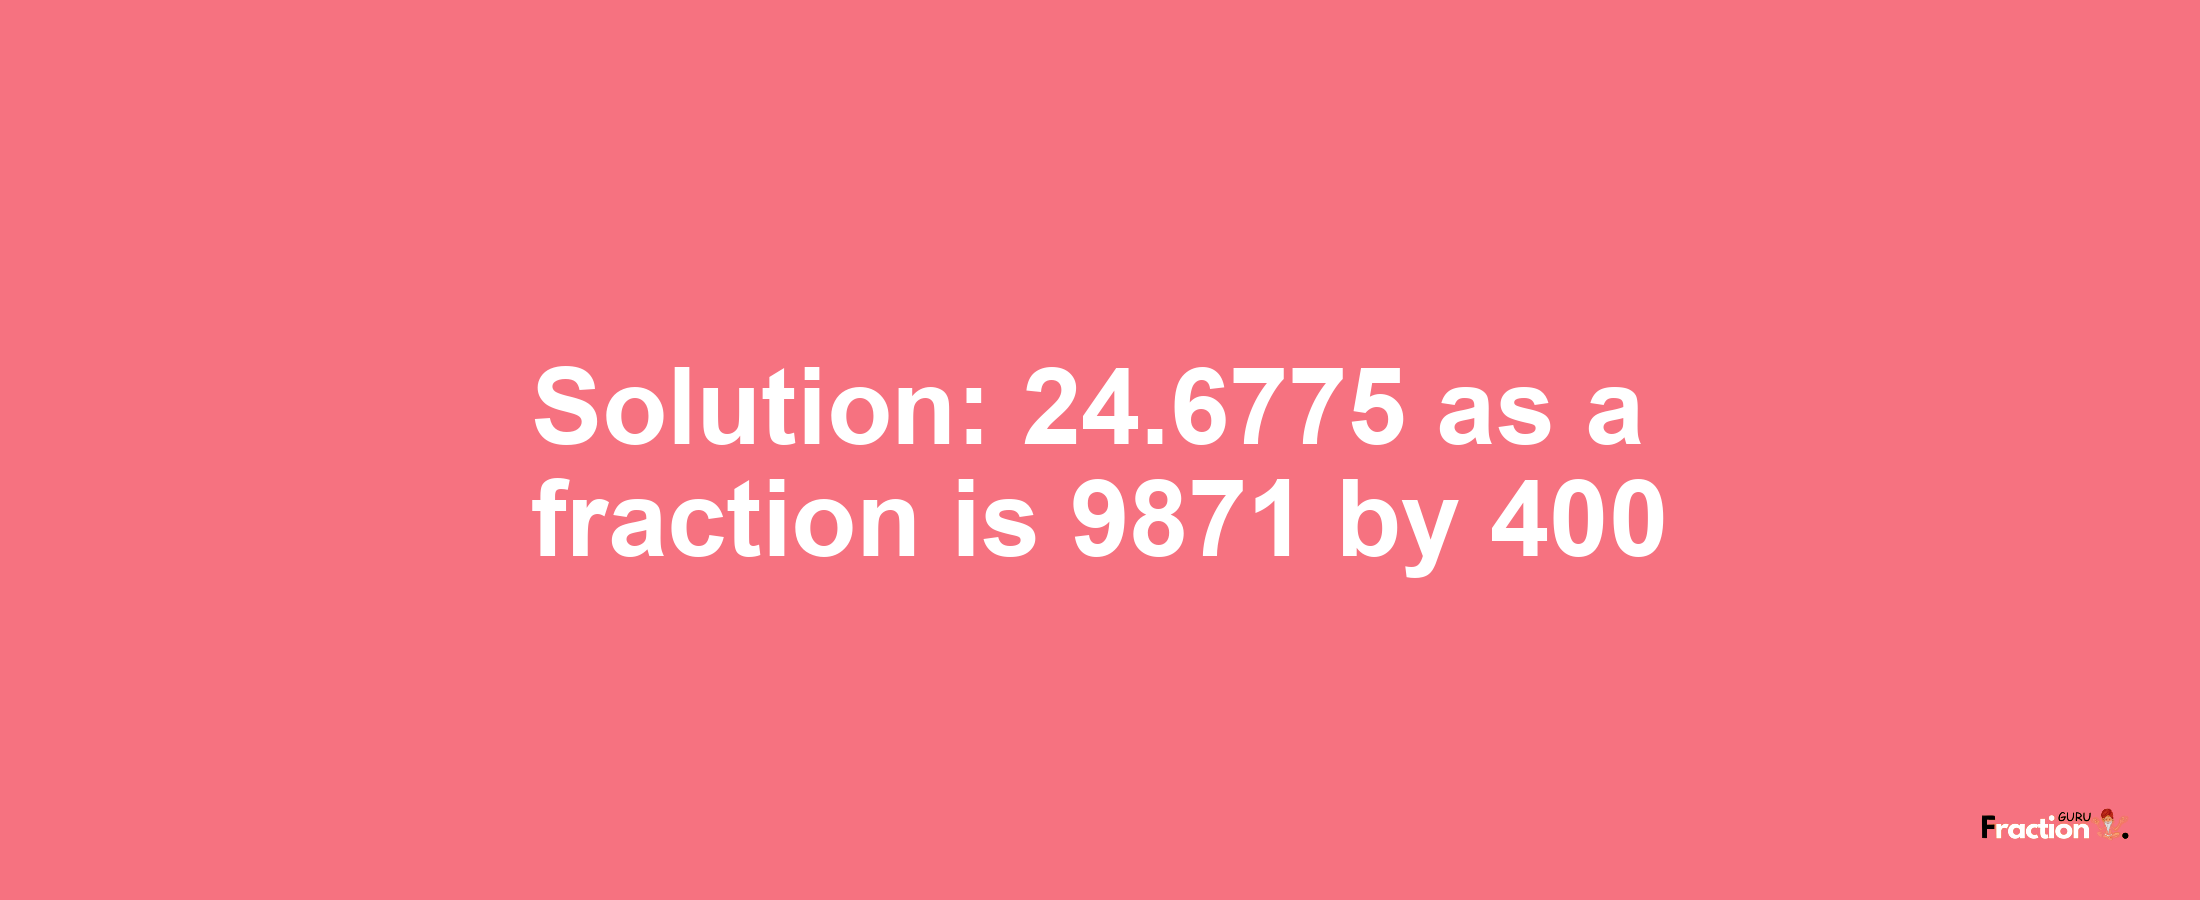 Solution:24.6775 as a fraction is 9871/400